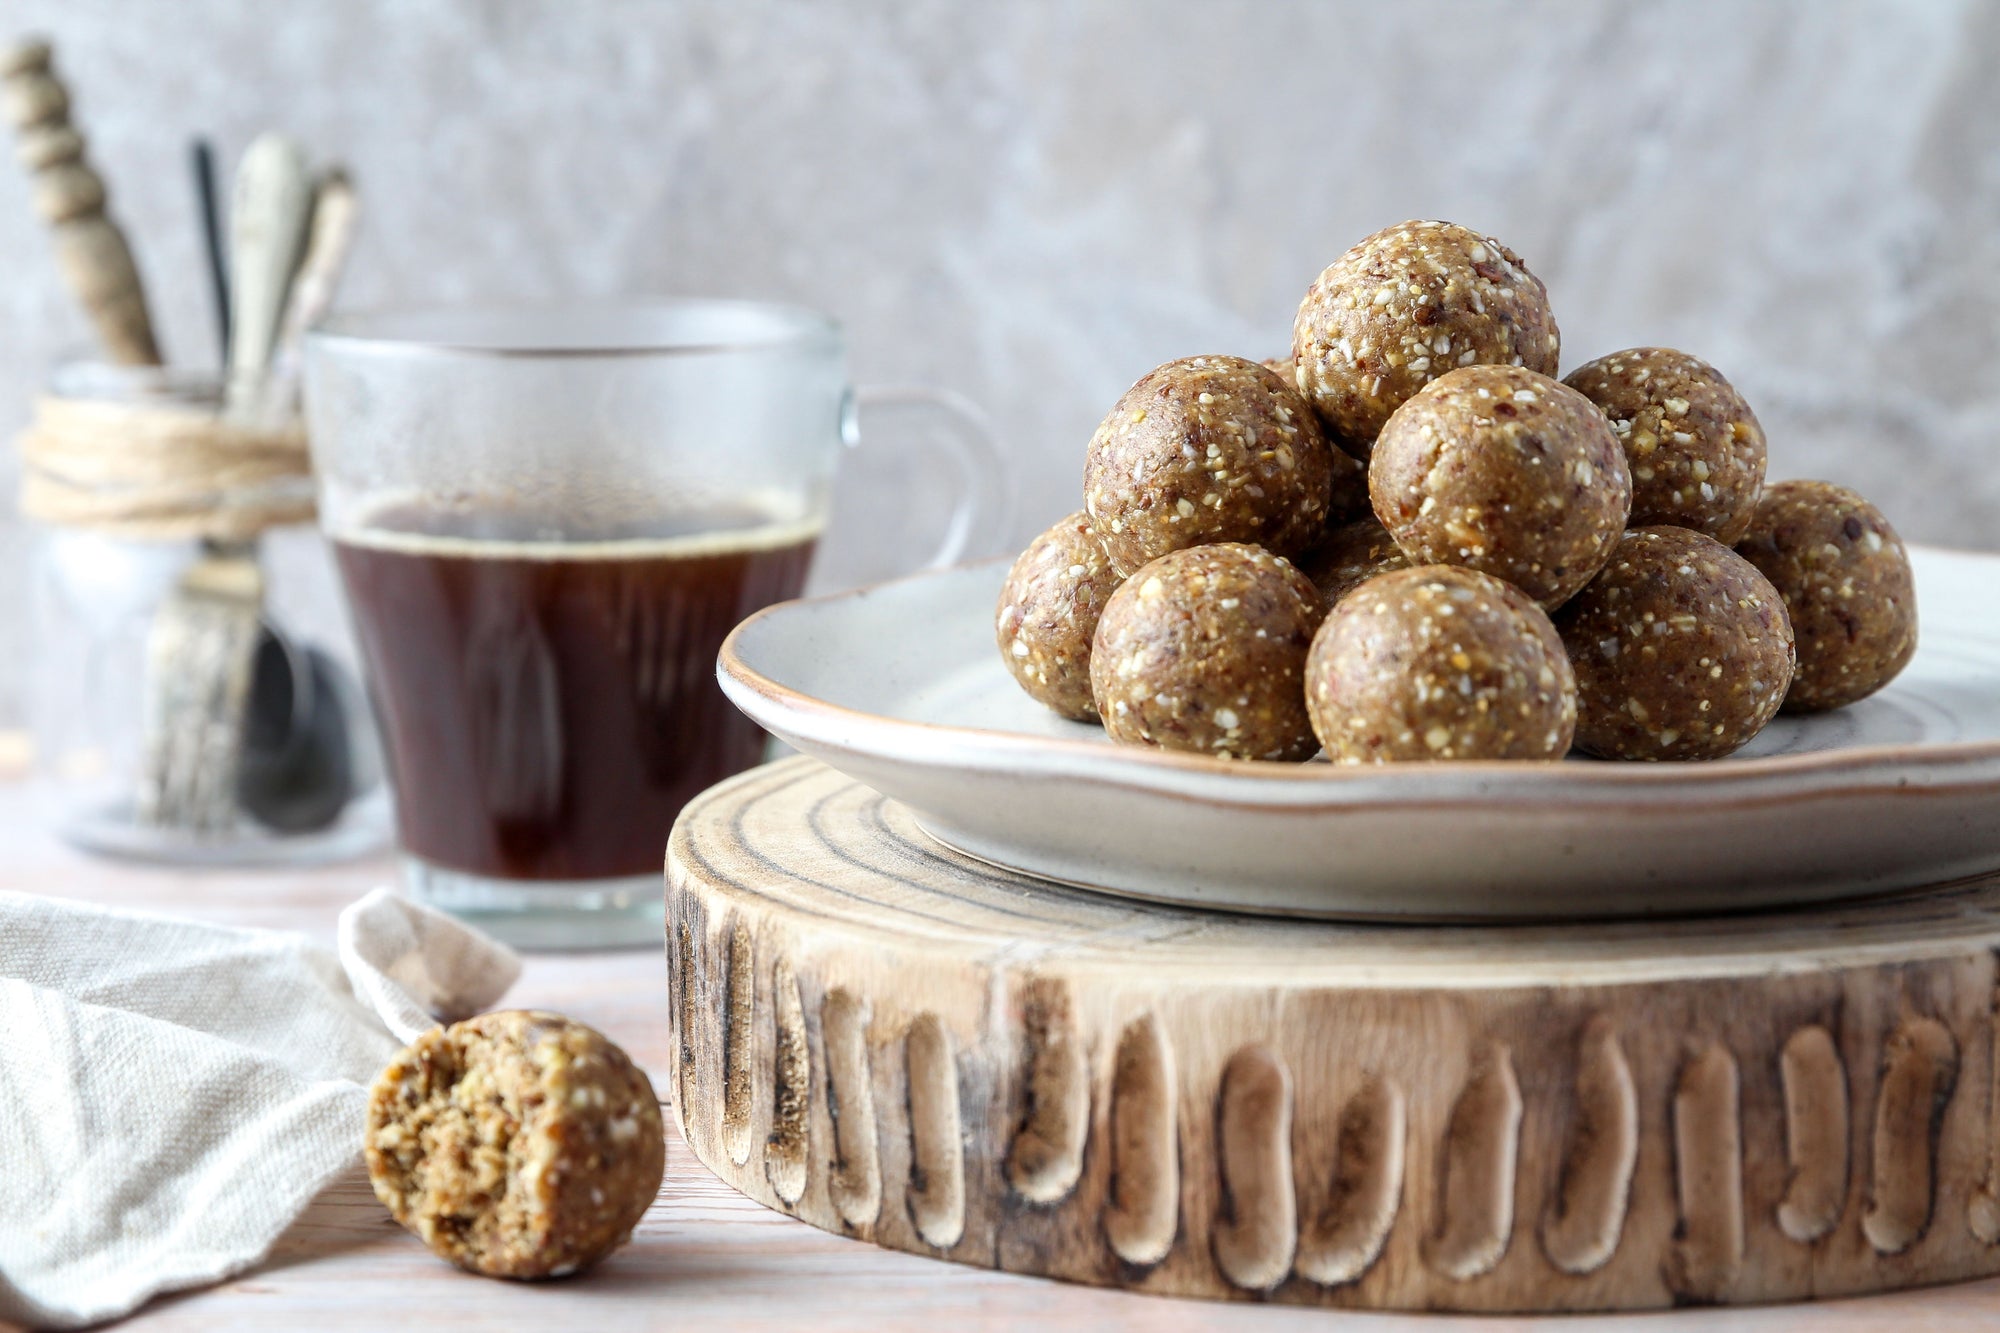 Breakfast on the go, a lunch box filler or a healthy snack these are perfect to make, keep in the fridge and have ready to go. This high protein bliss ball recipe Te Atatu Toasted Gluten free muesli, which is perfect for breakfast and gluten free baking.